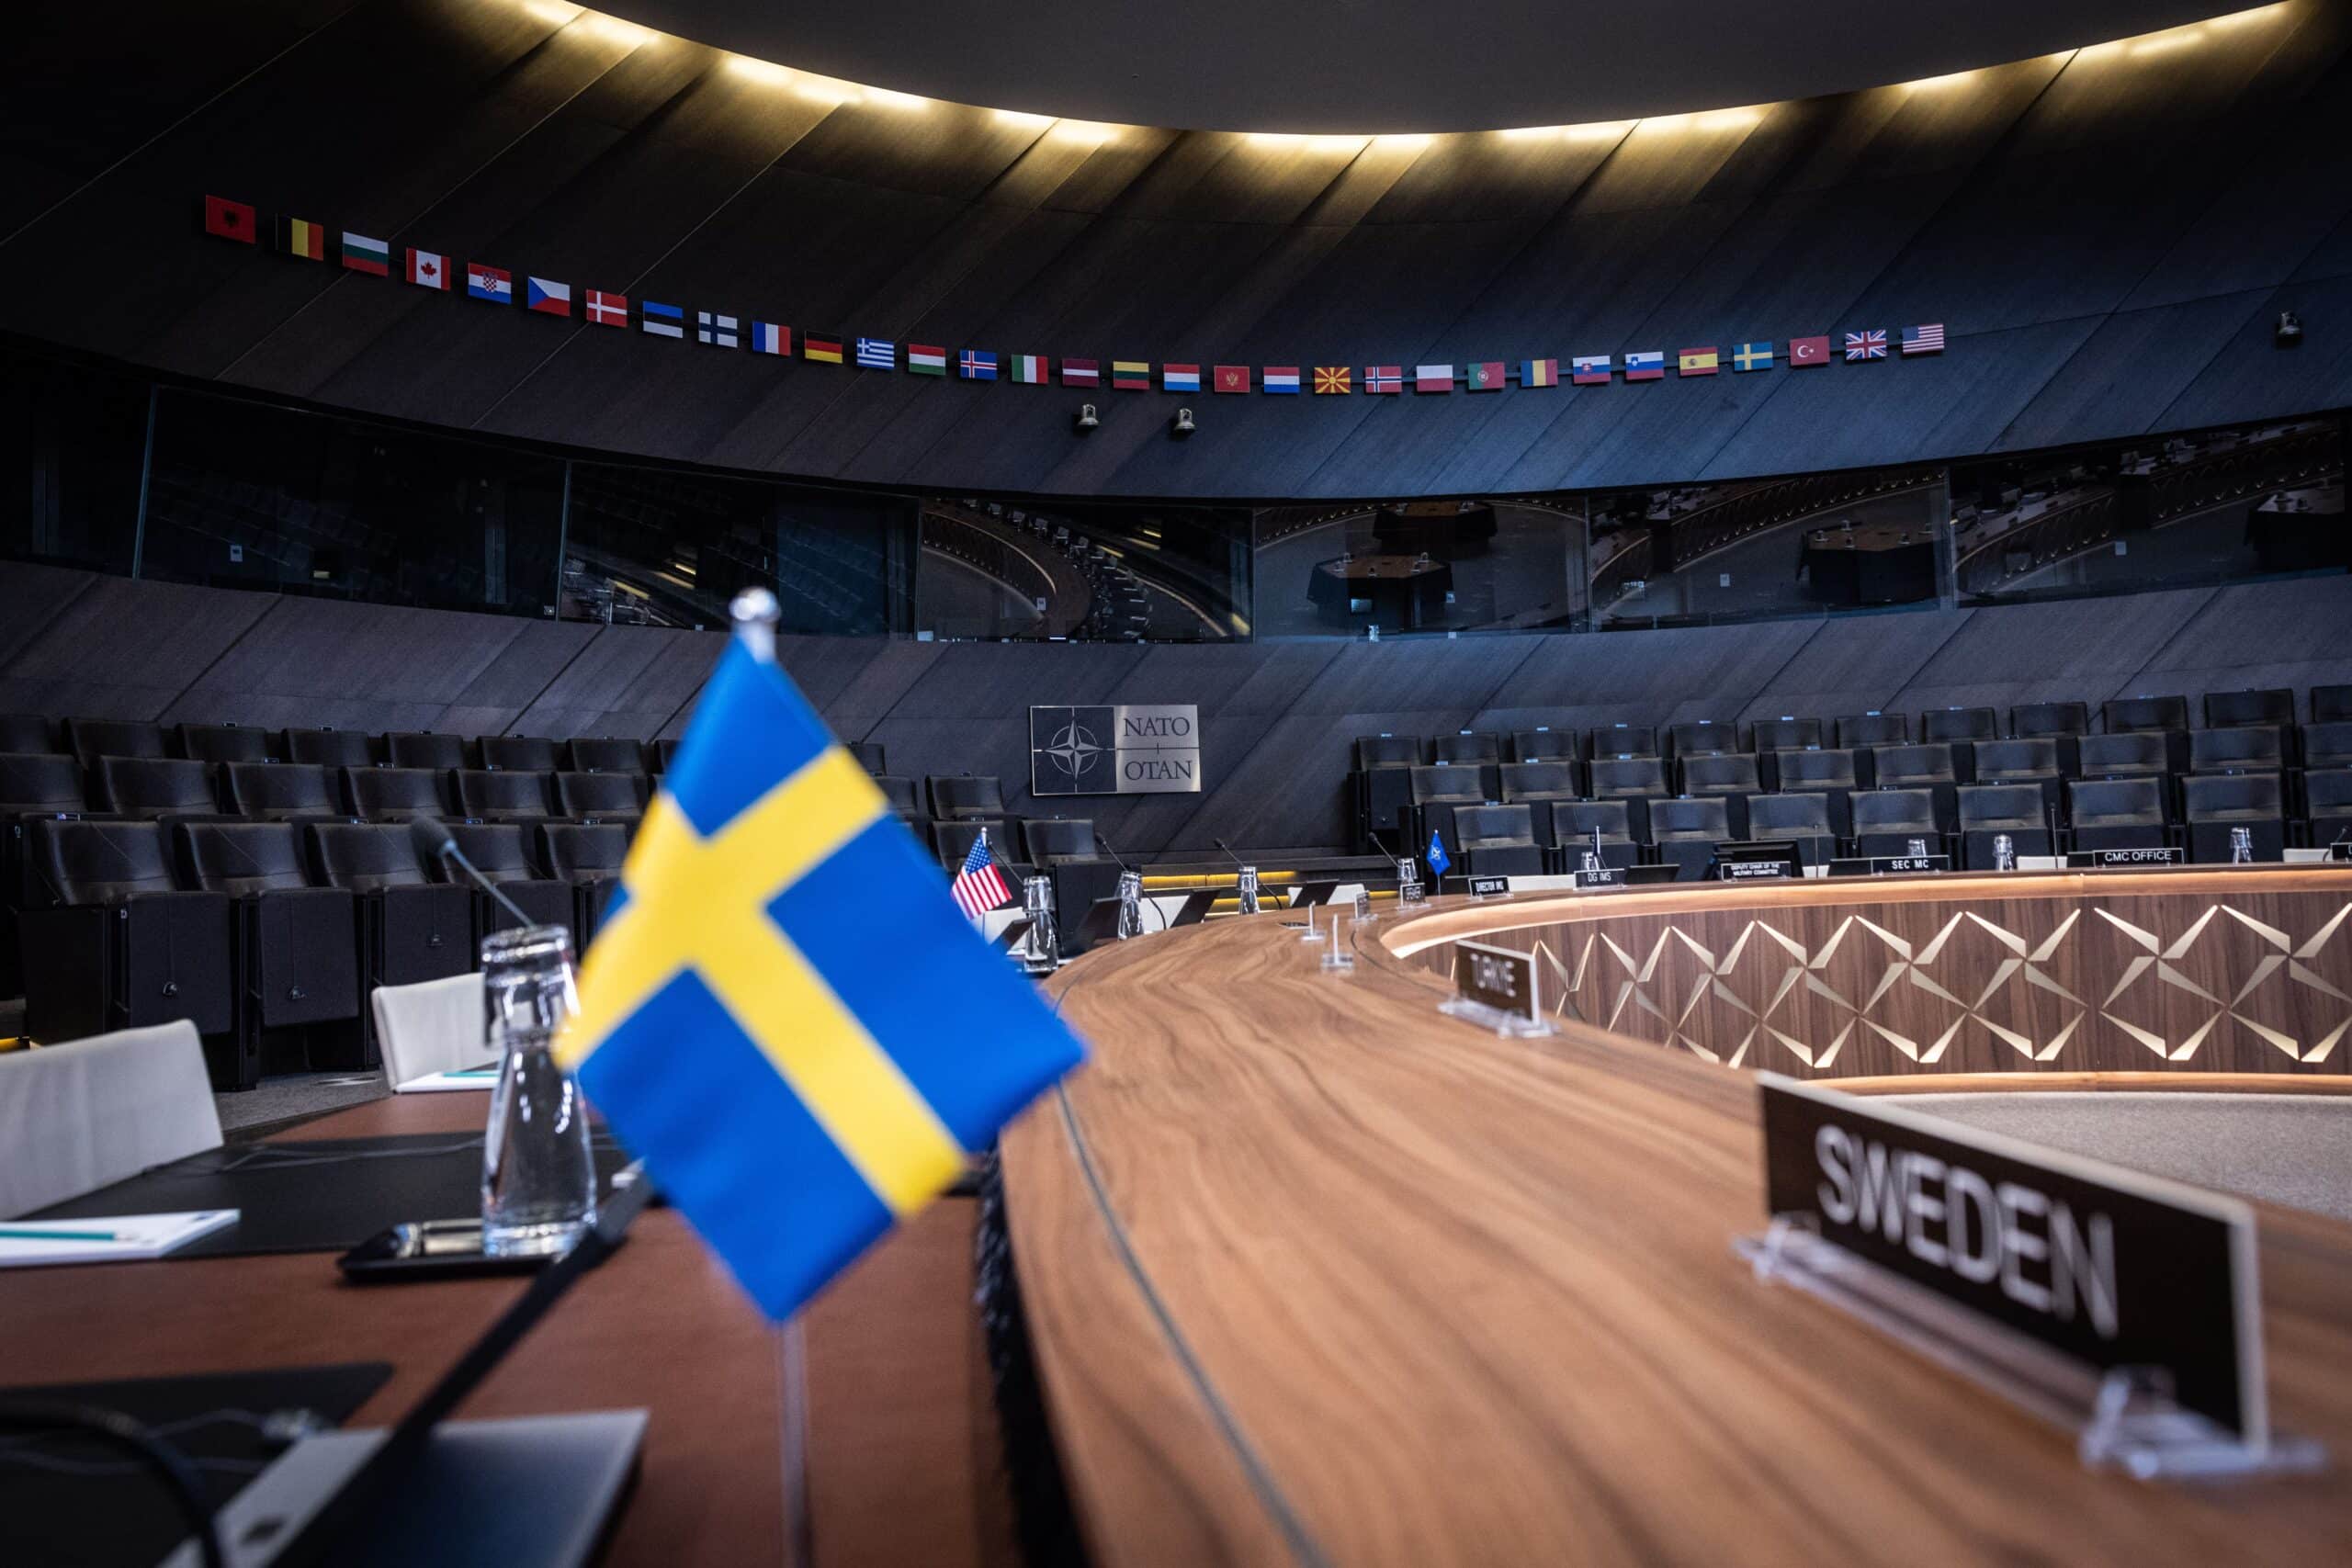 The yellow and blue Swedish flag is seen at the NATO headquarters against a brown conference table and dark blue background